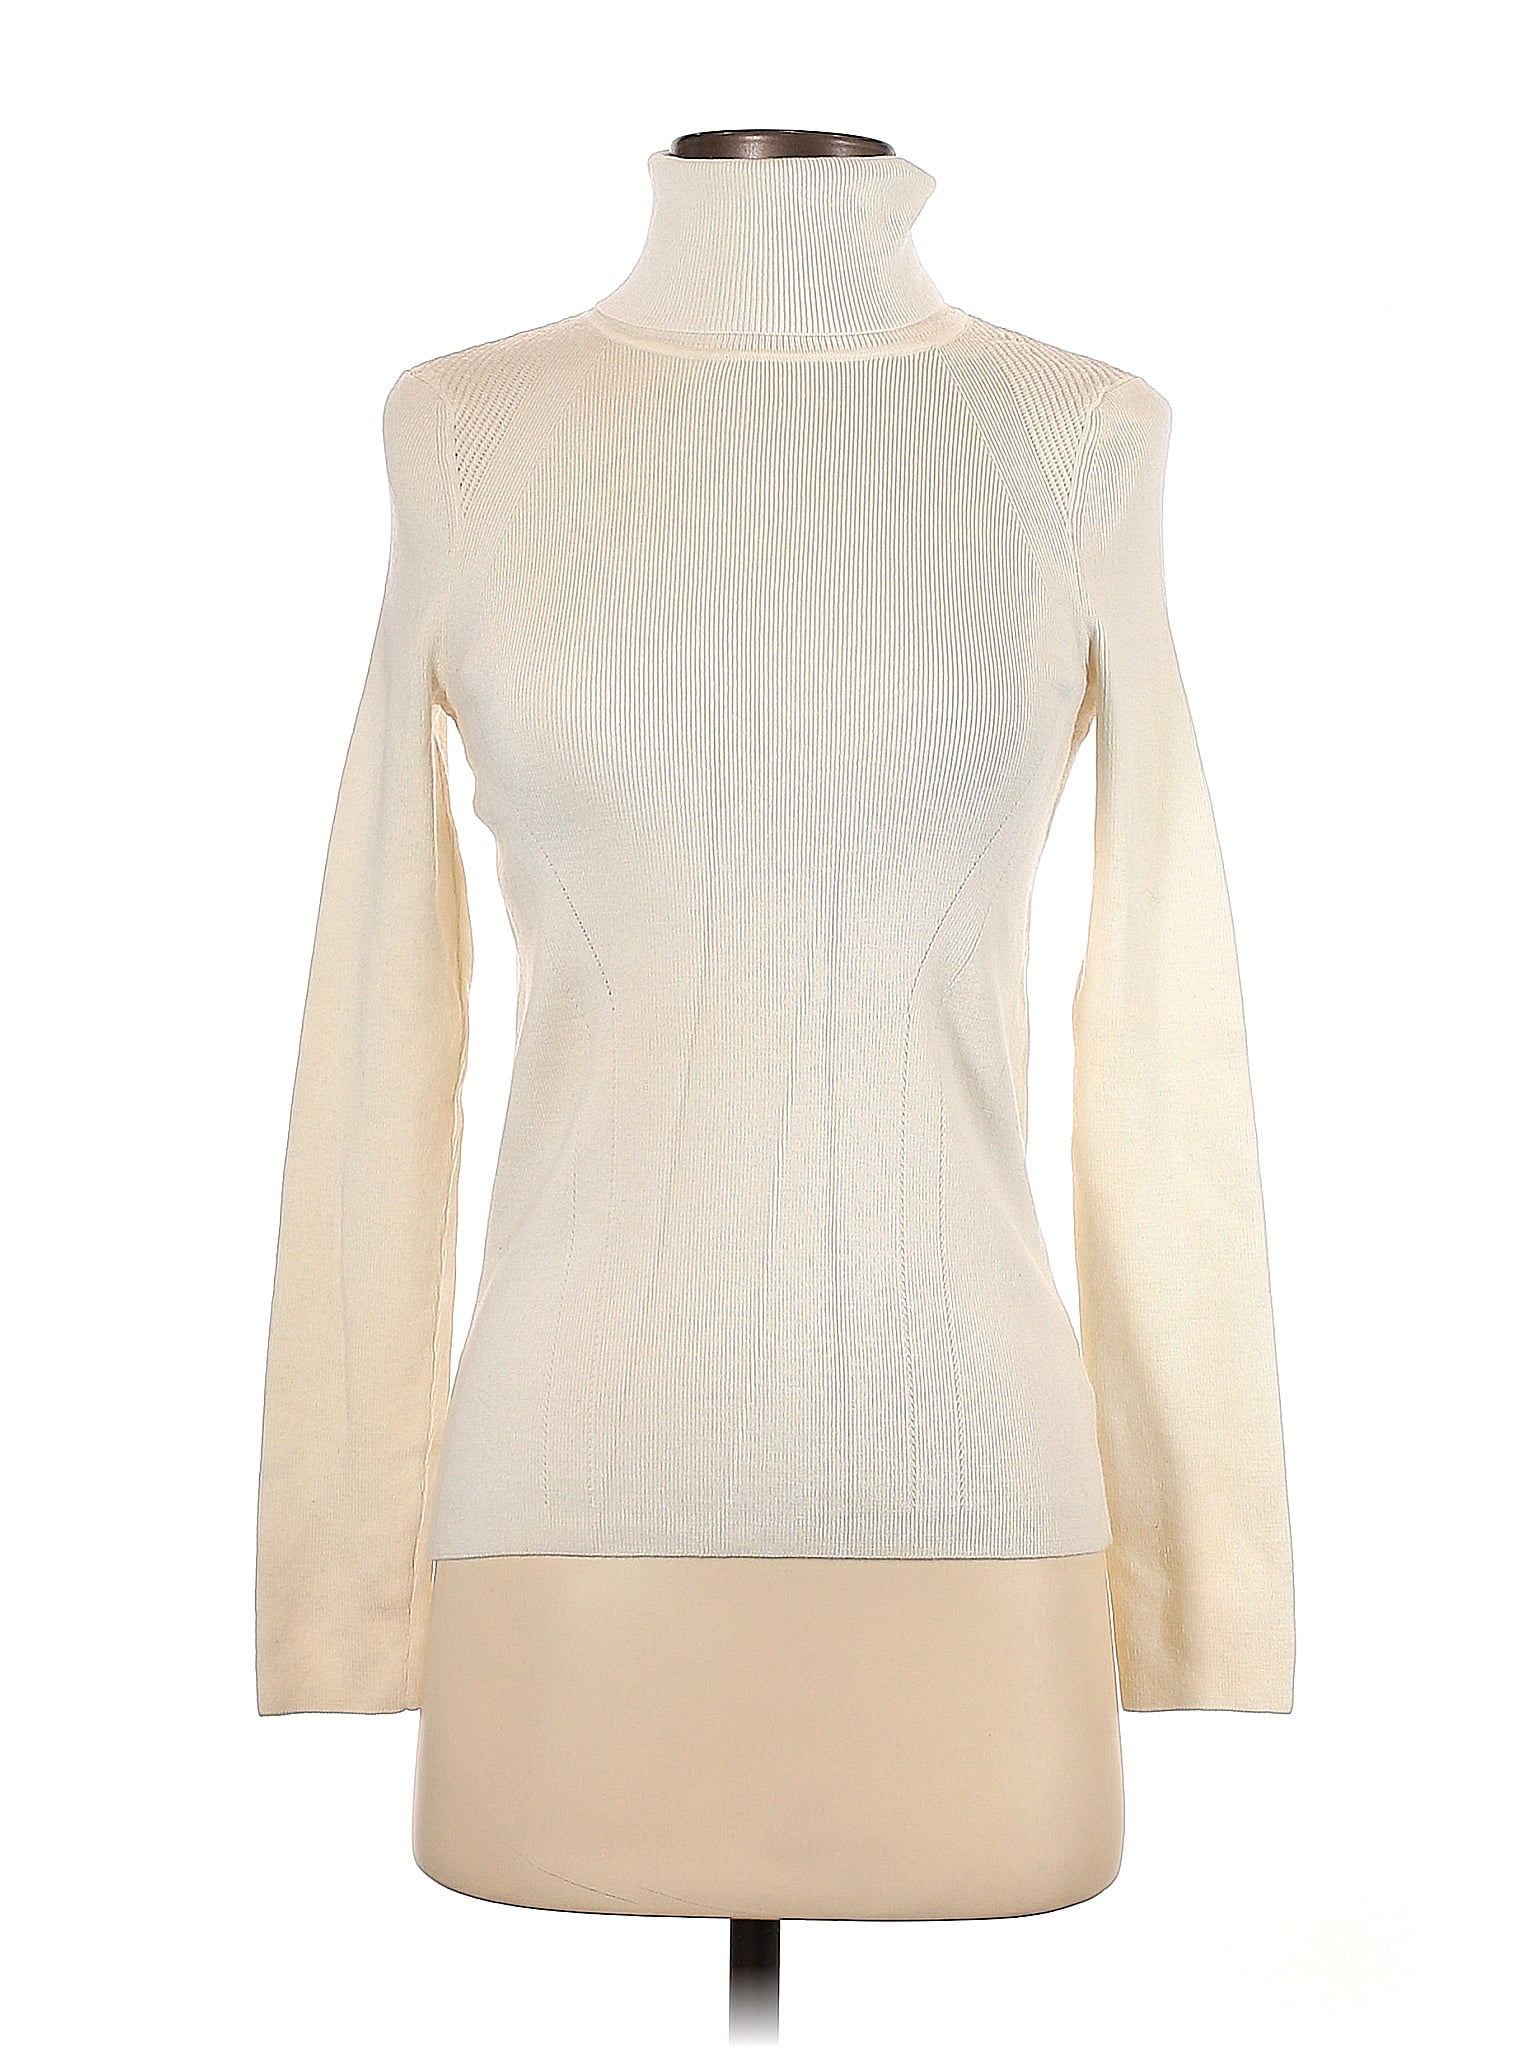 Athleta Color Block Solid Ivory Turtleneck Sweater Size S - 56% off ...